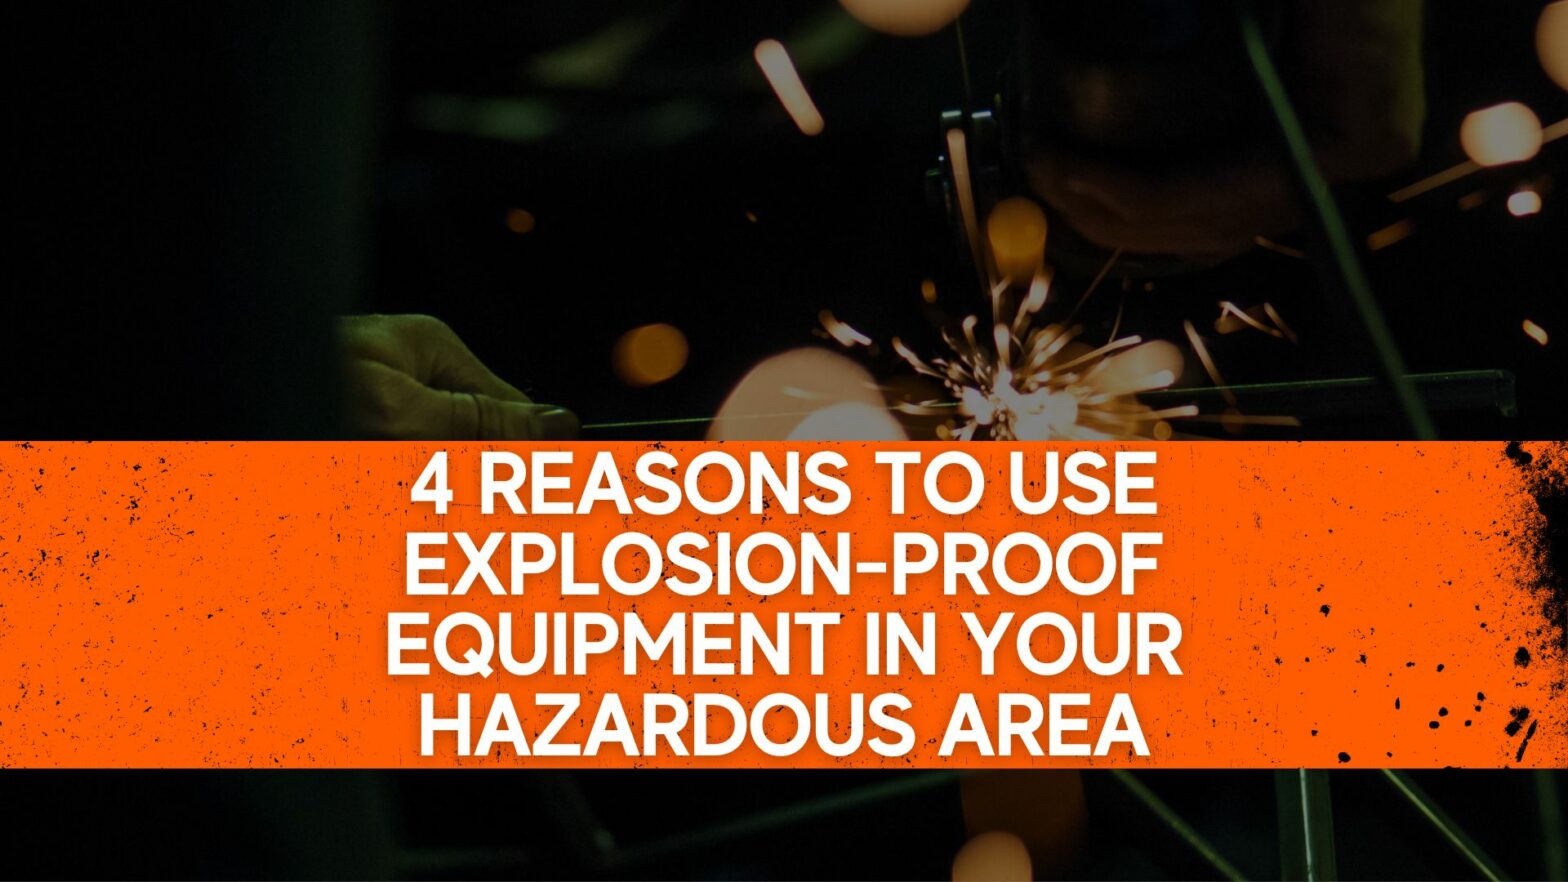 4 reasons to use explosion-proof equipment in your hazardous area